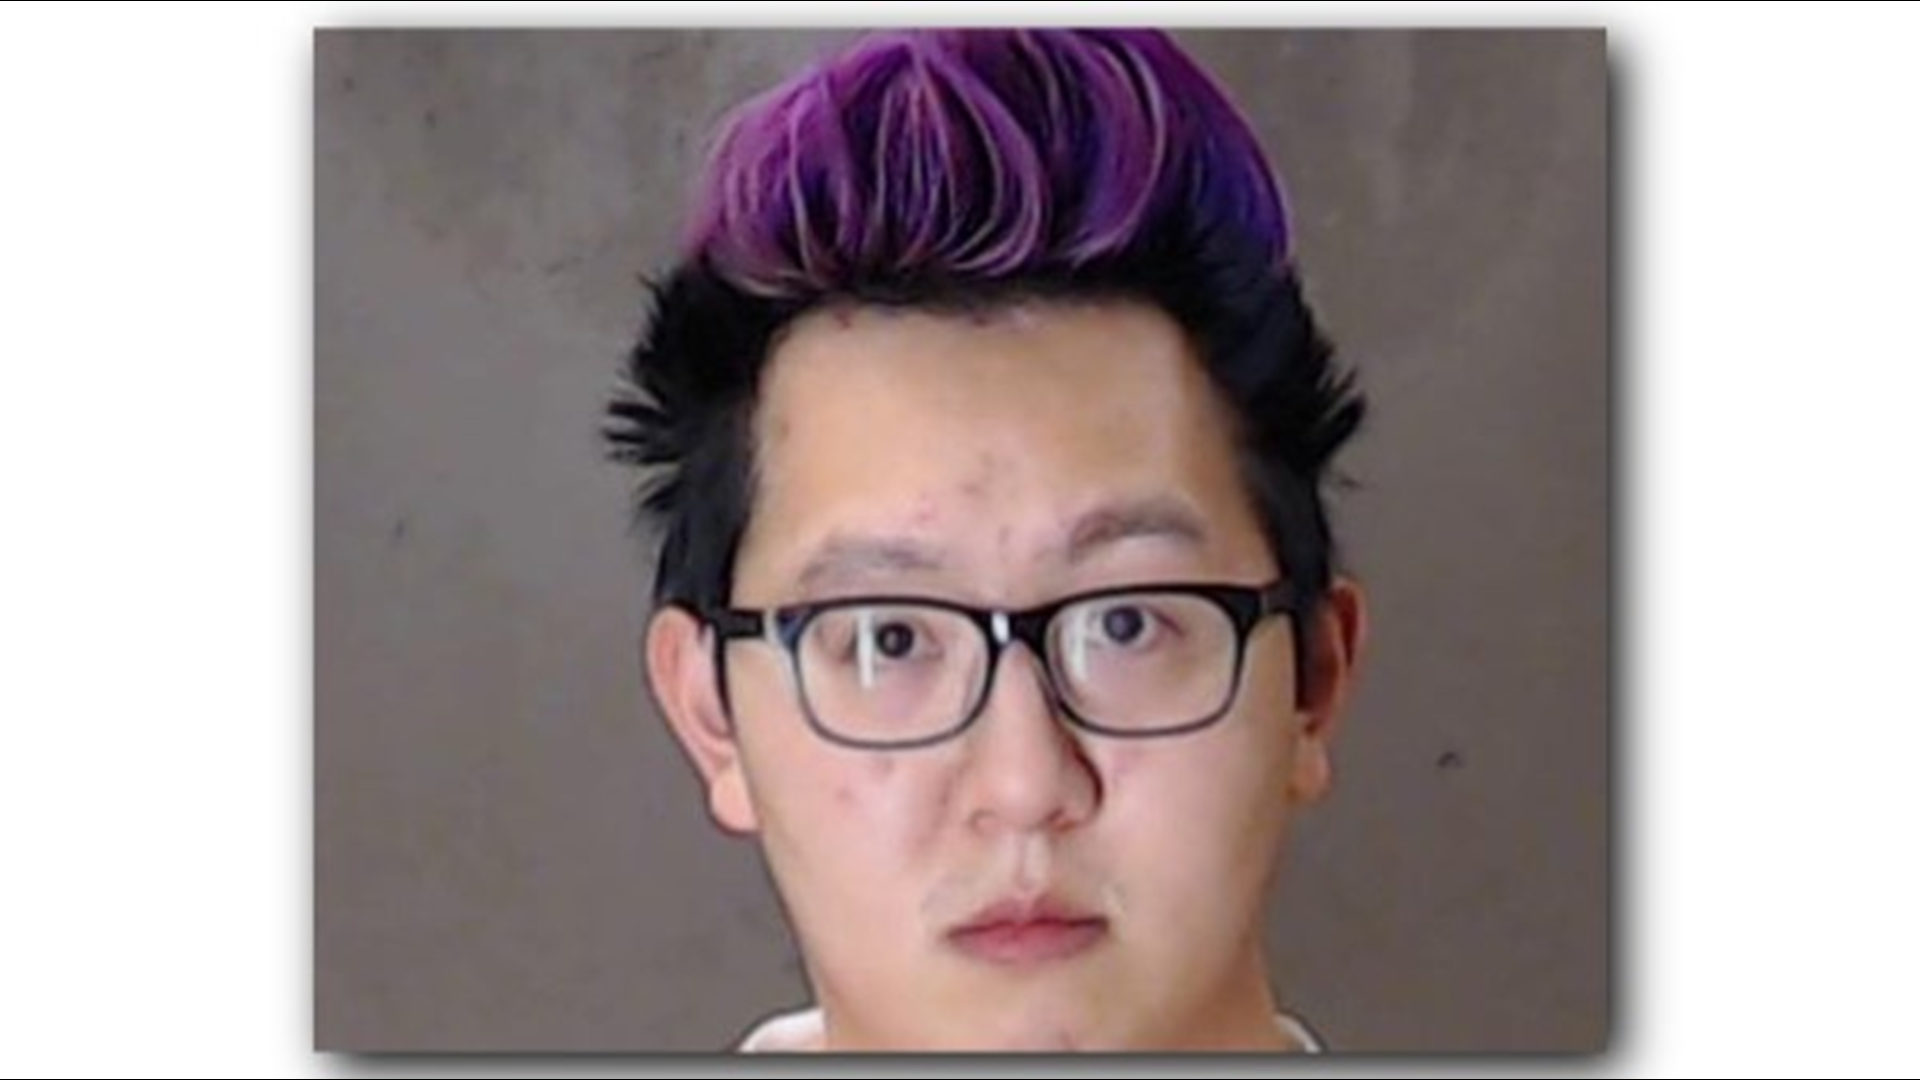 Thomas Cheung, one of the men arrested for allegedly arranging to have sex with a child in DeKalb, is reportedly a Twitch partner and was fired by Hi-Rez Studios, a gaming company based in Alpharetta.